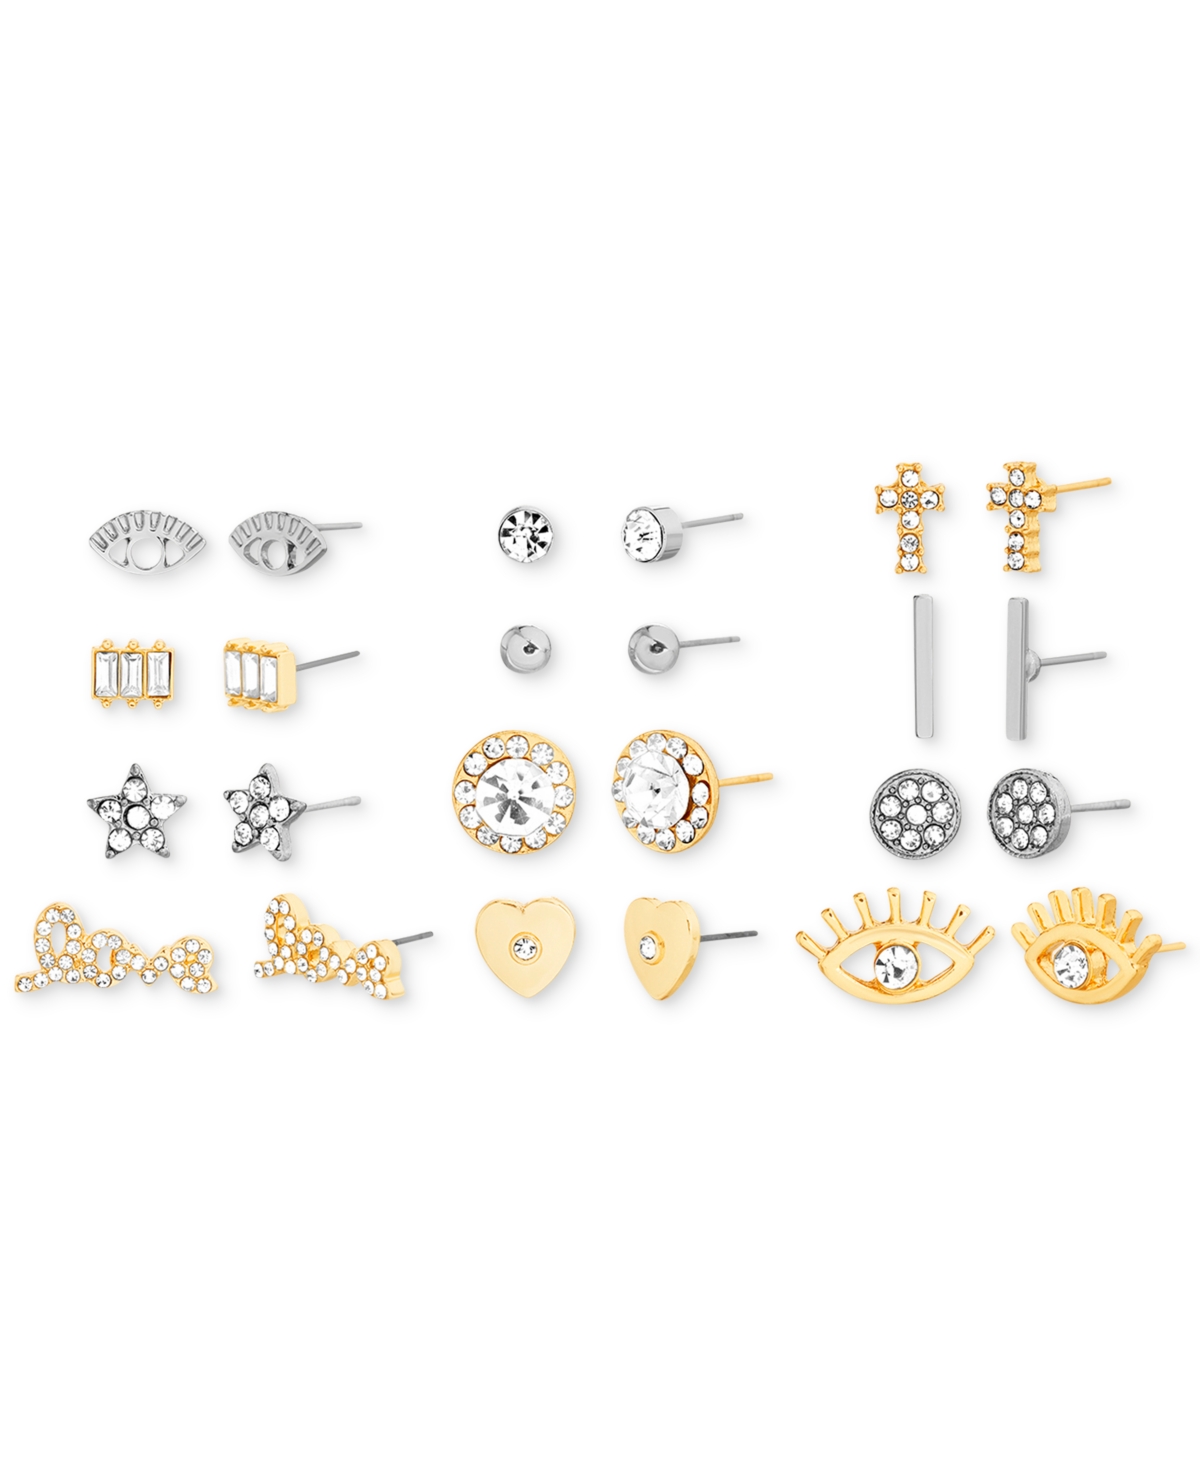 Kensie Two-tone 12-pc. Set Crystal & Imitation Pearl Mixed Stud Earrings In Two-tone Set